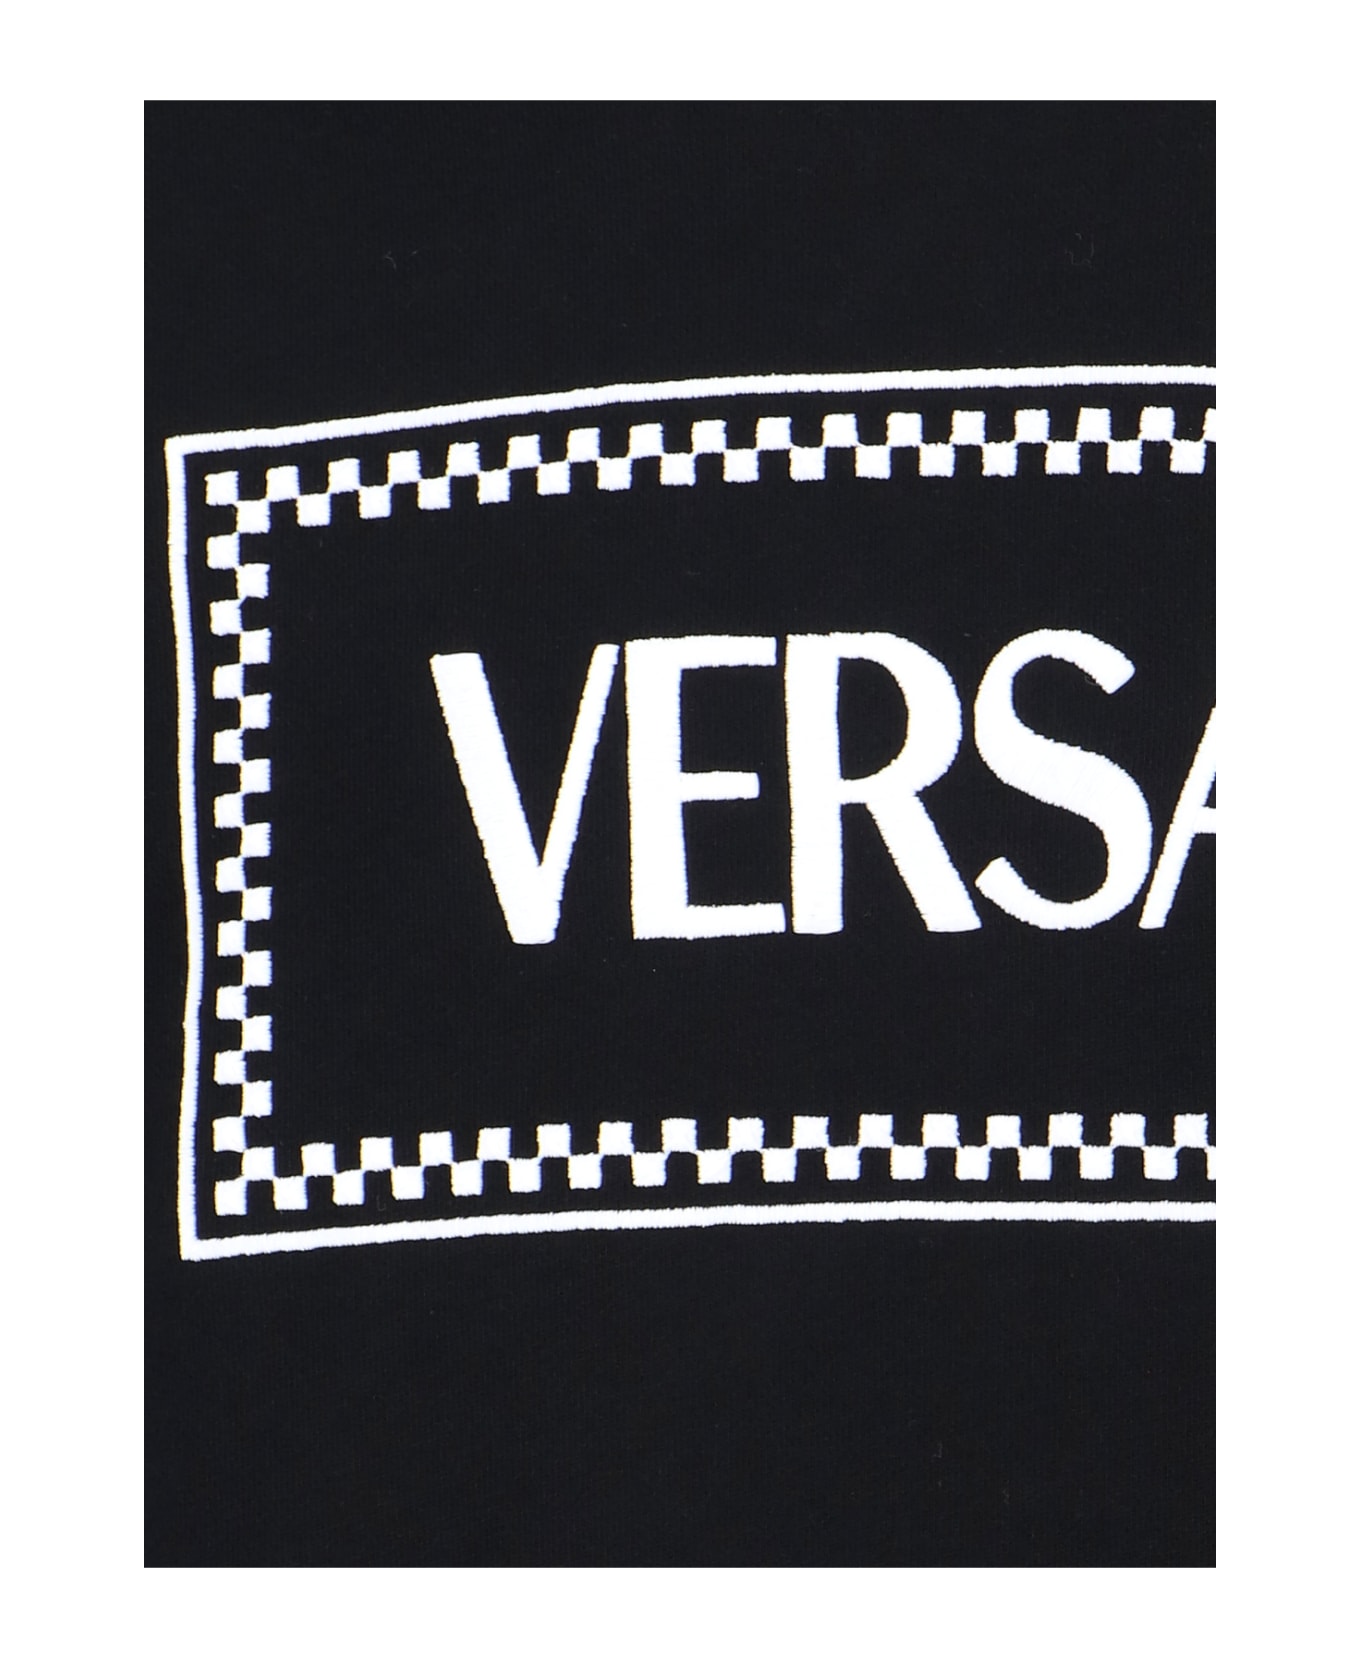 Versace Black Hoodie With Contrasting Logo Lettering Print In Cotton Man - Black フリース